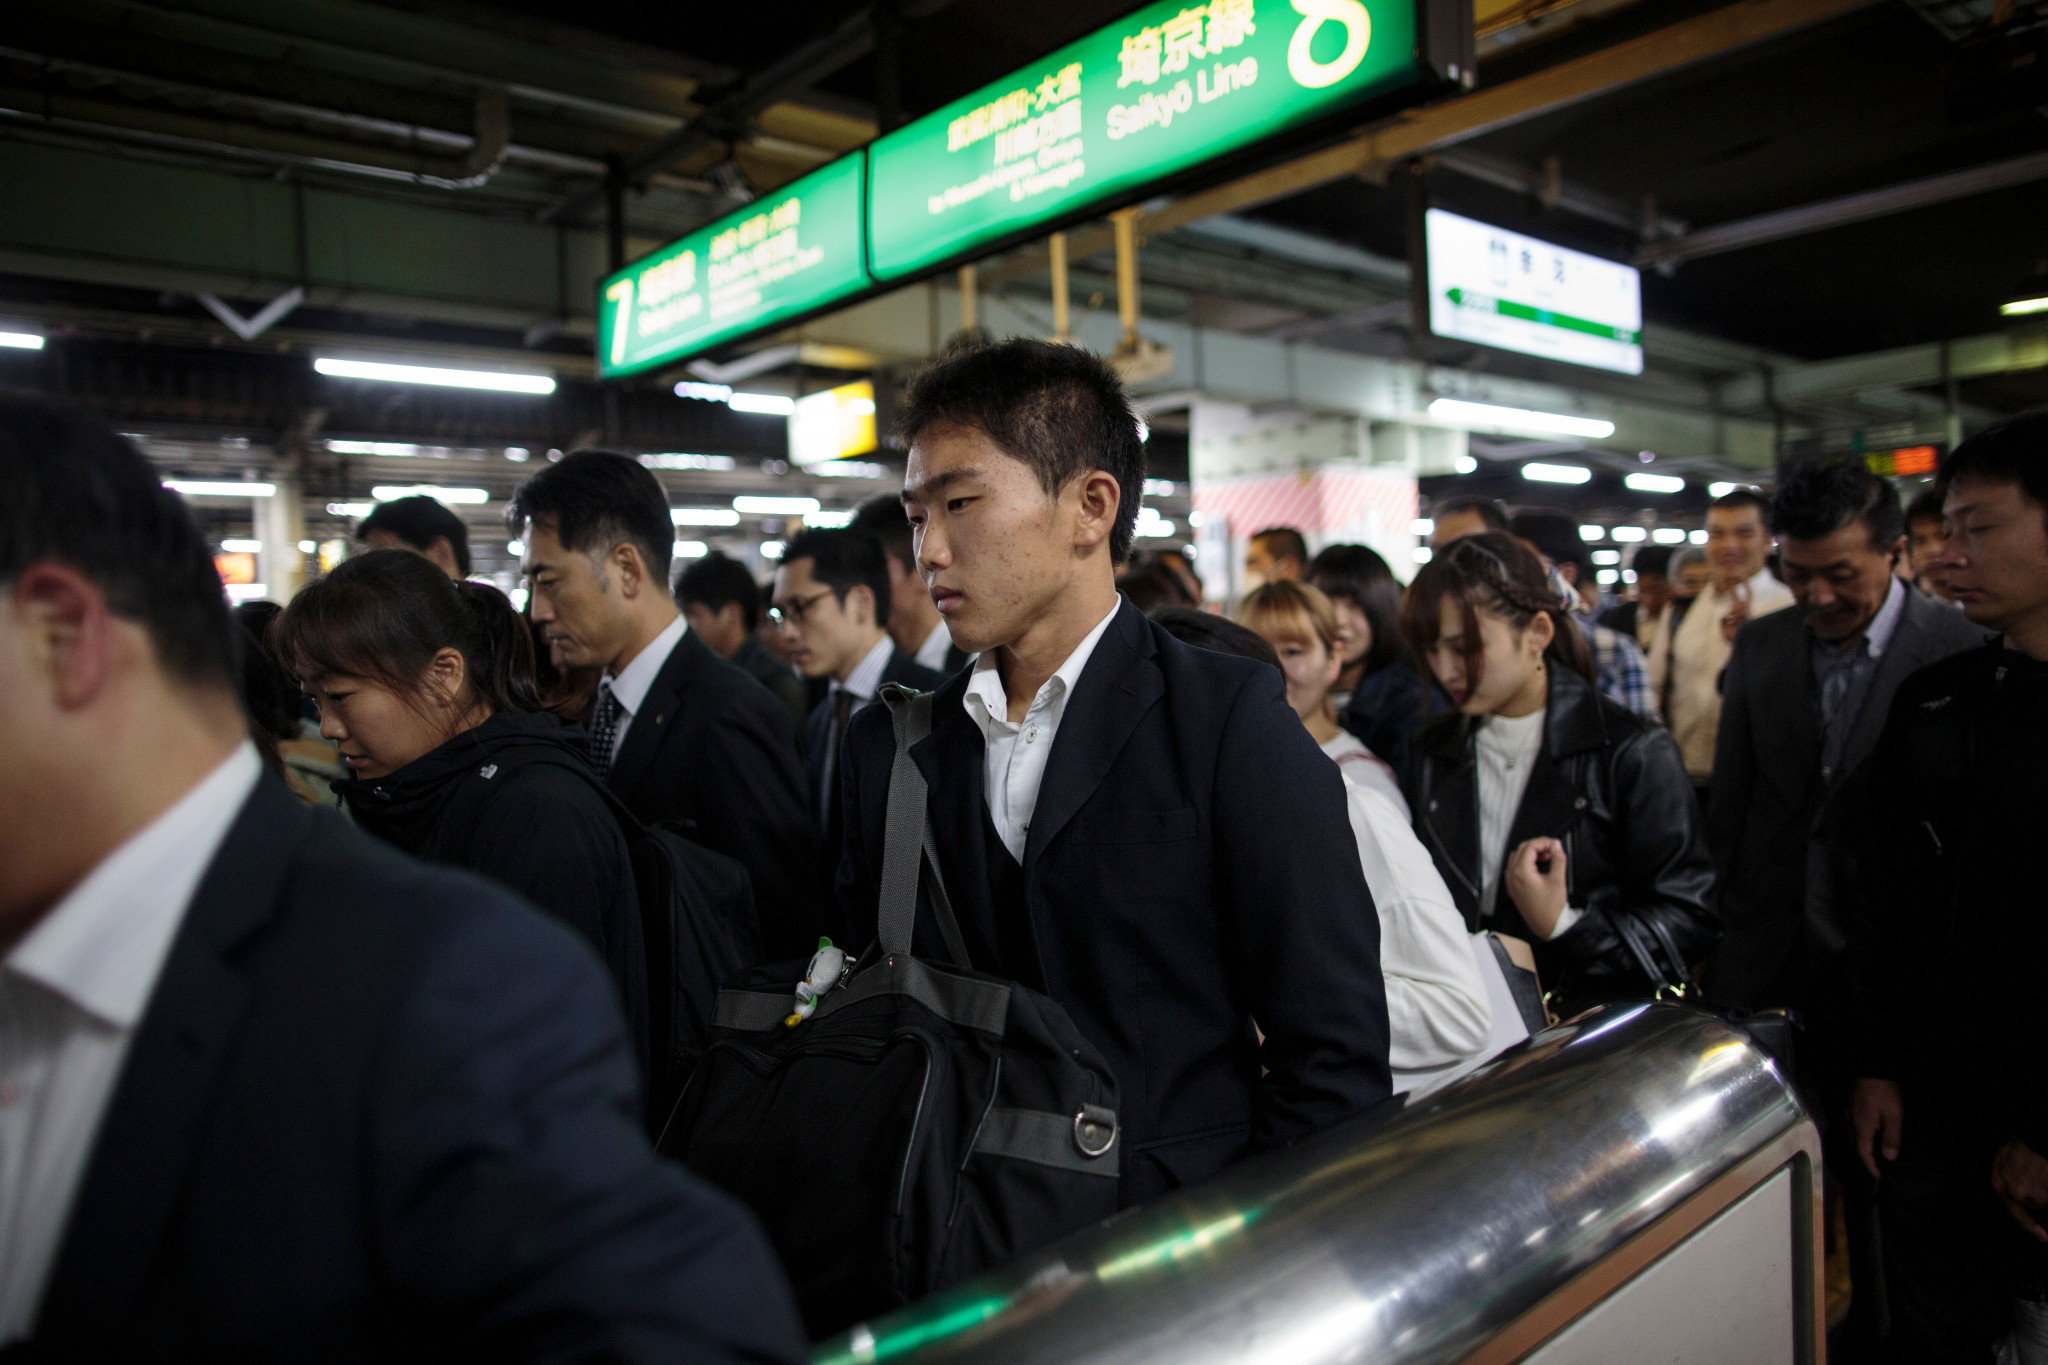 Study warns Tokyo 2020 could cause "fatal congestion" on subway system